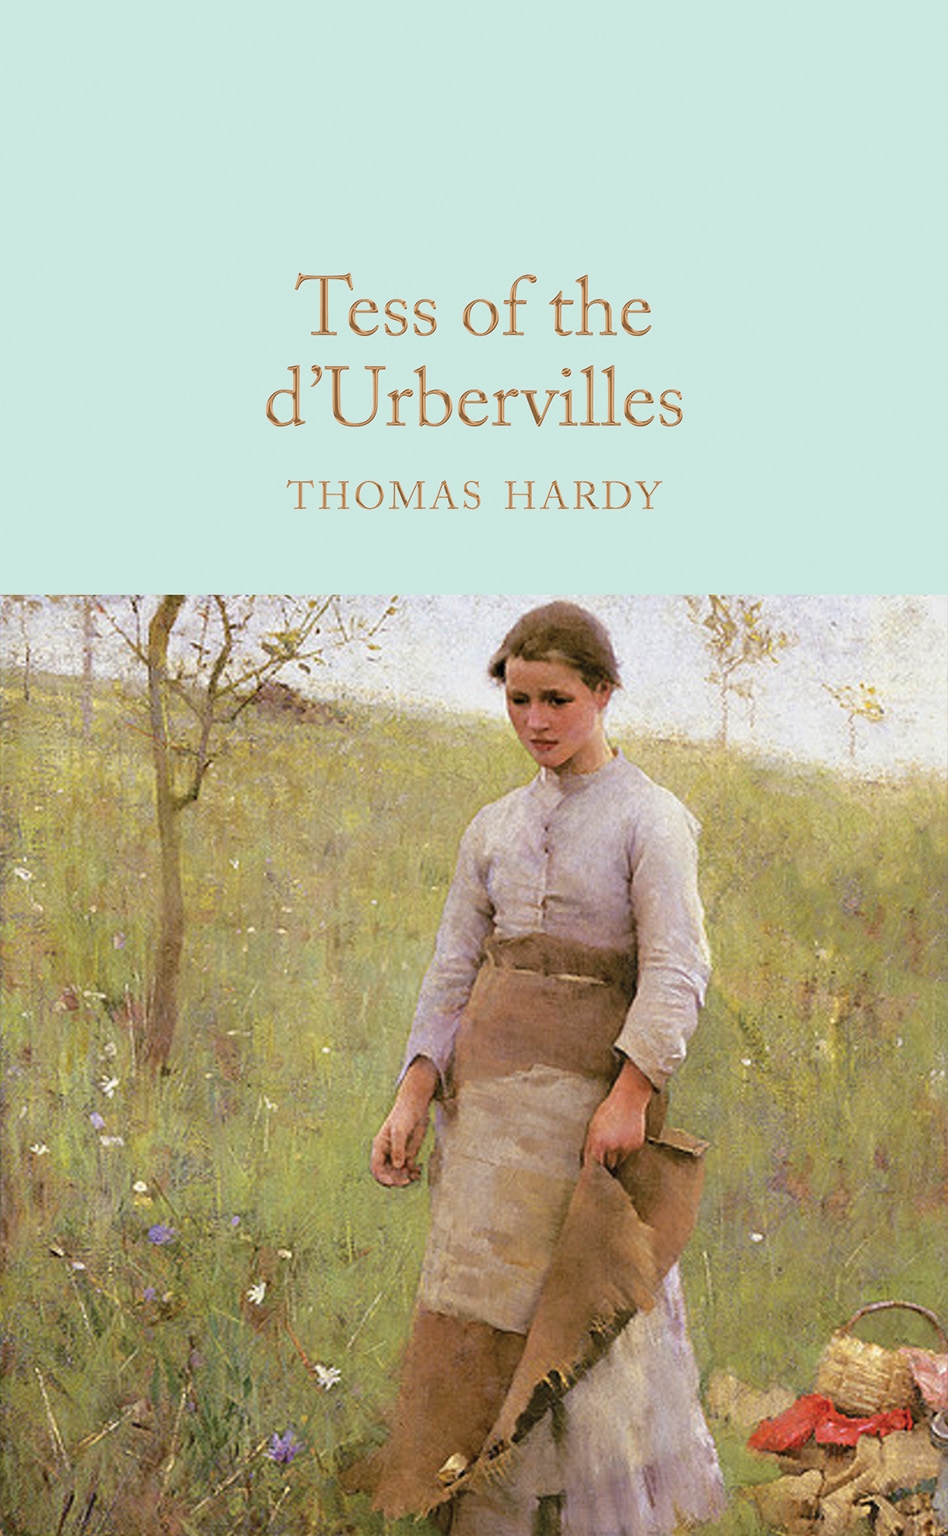 Book “Tess of the D'Urbervilles” by Thomas Hardy — May 8, 2018